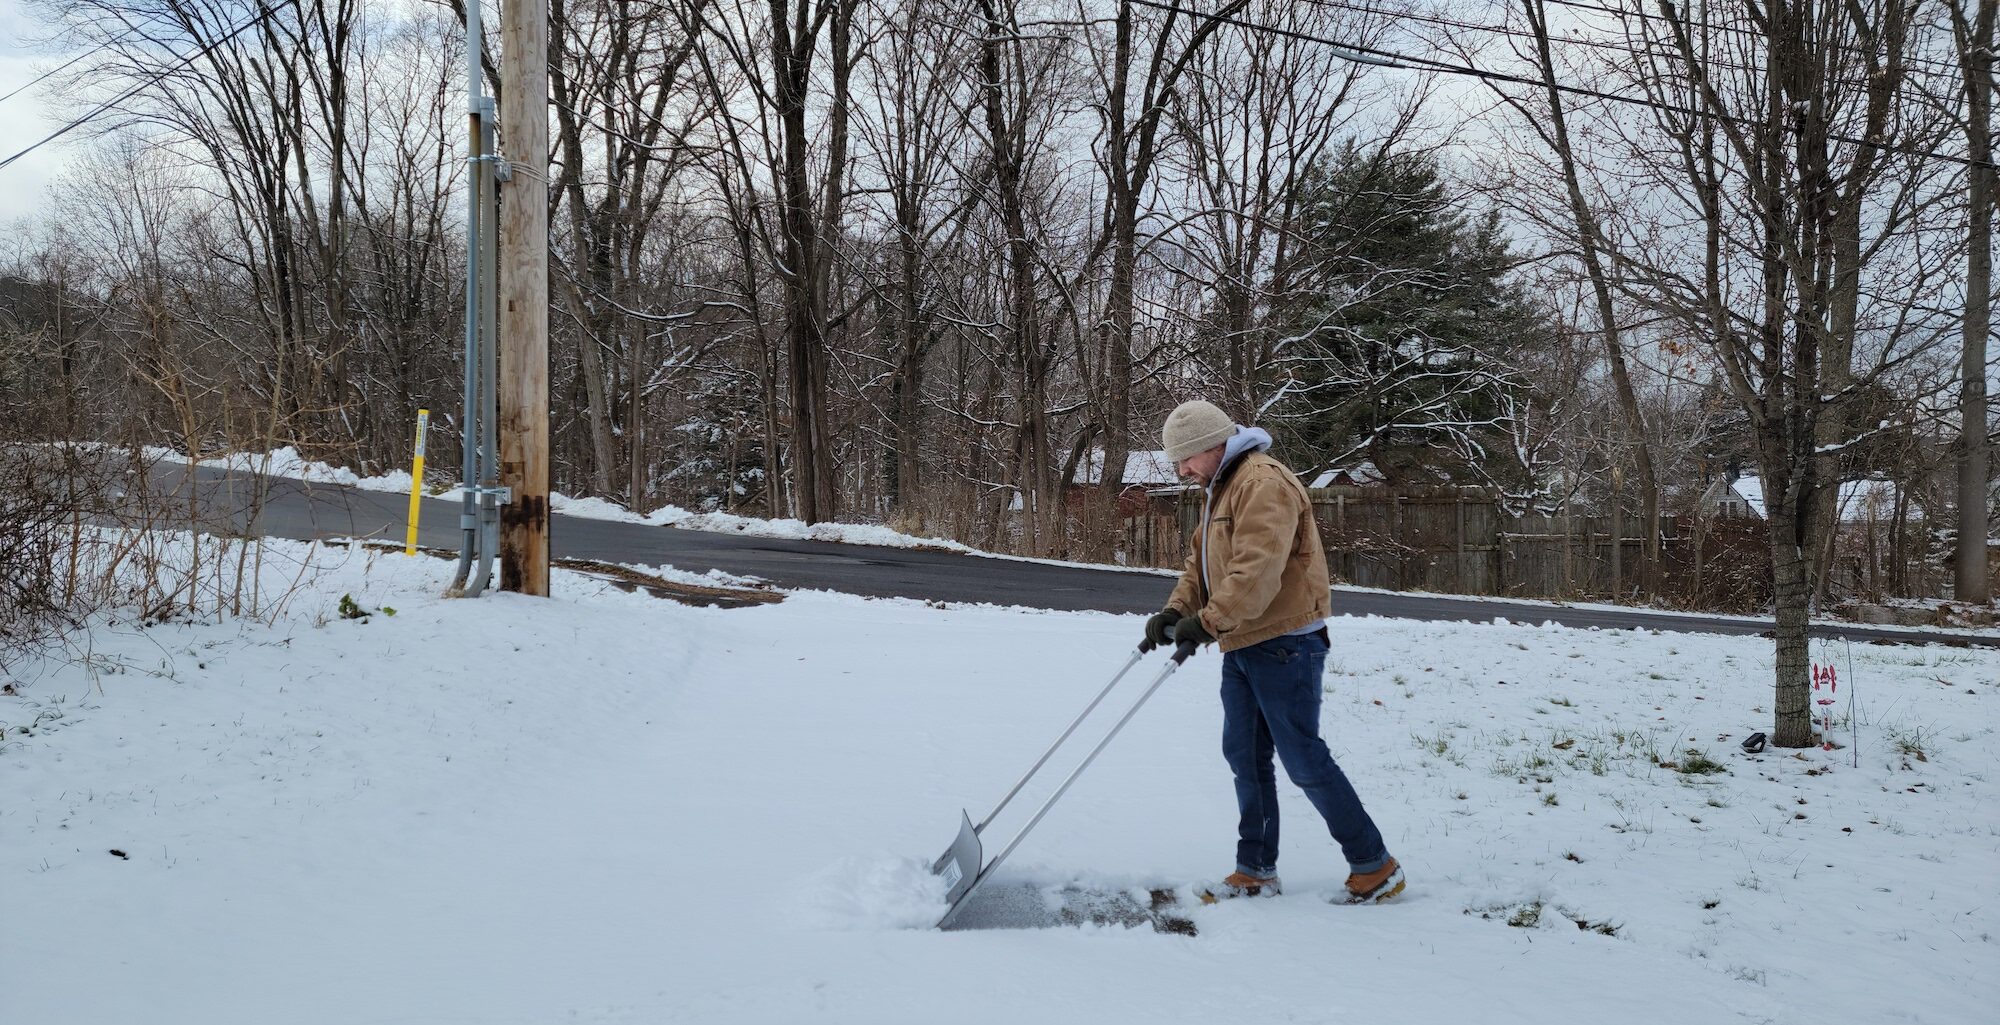 A person using the best snow shovel to clear a path in the snow.